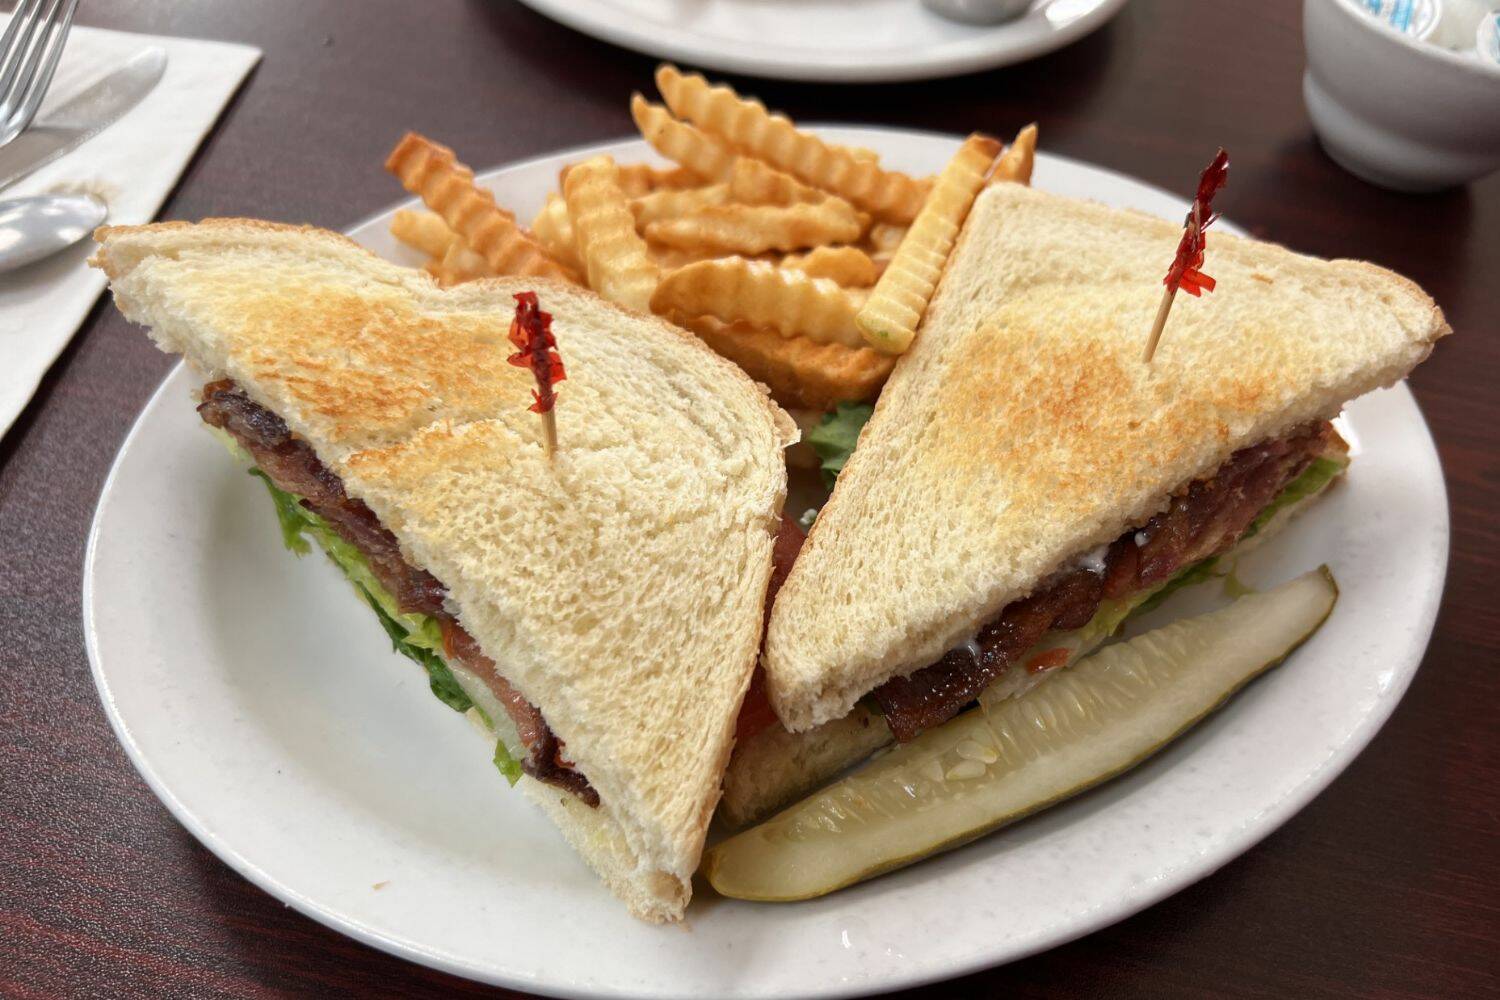 California BLT from Maggie's on Meeker. (Cameron Sheppard/Sound Publishing)